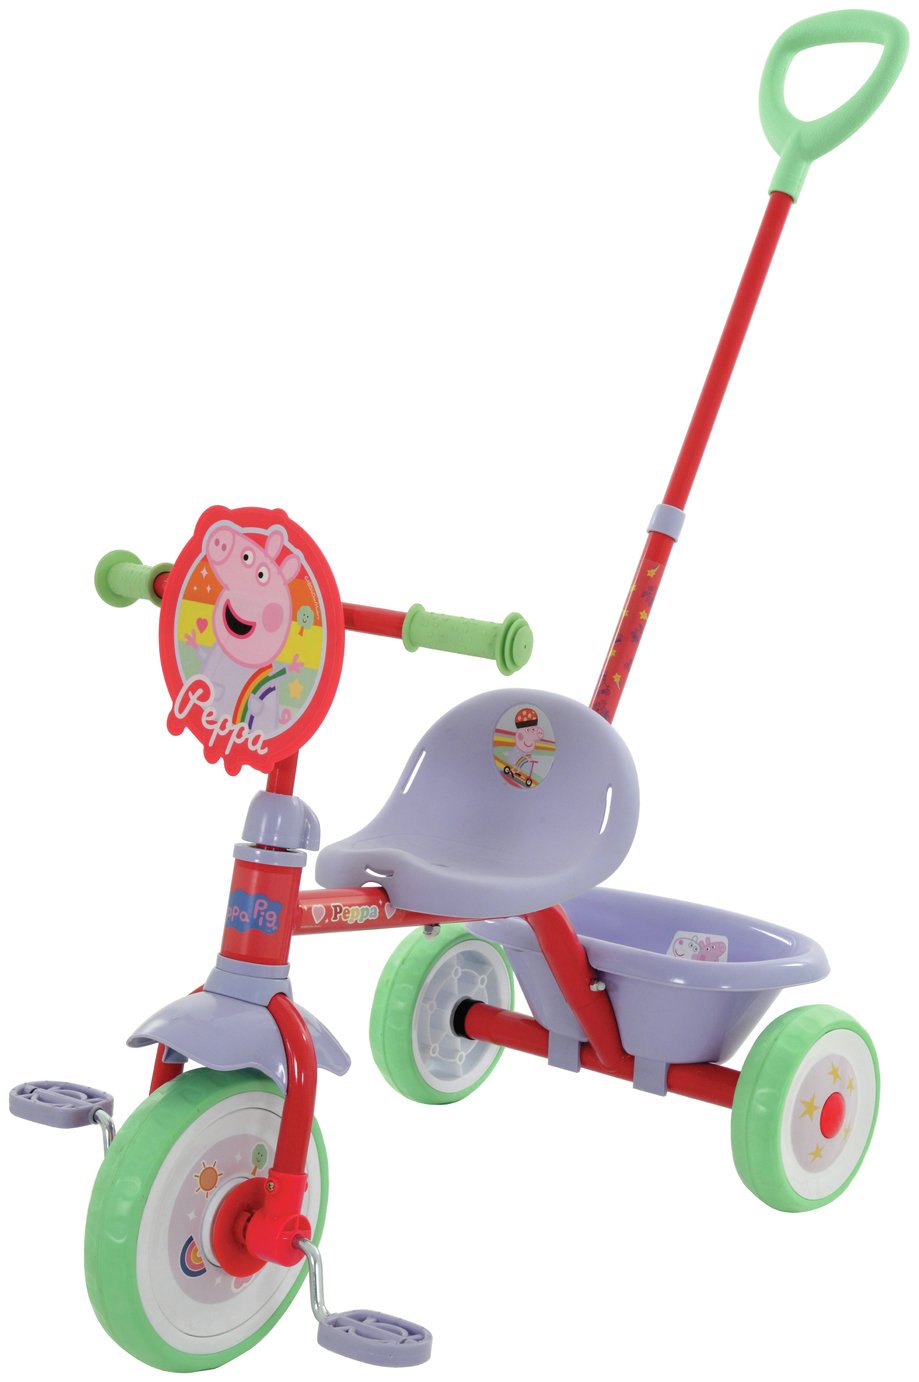 Peppa Pig My First Trike New Design Ride on review